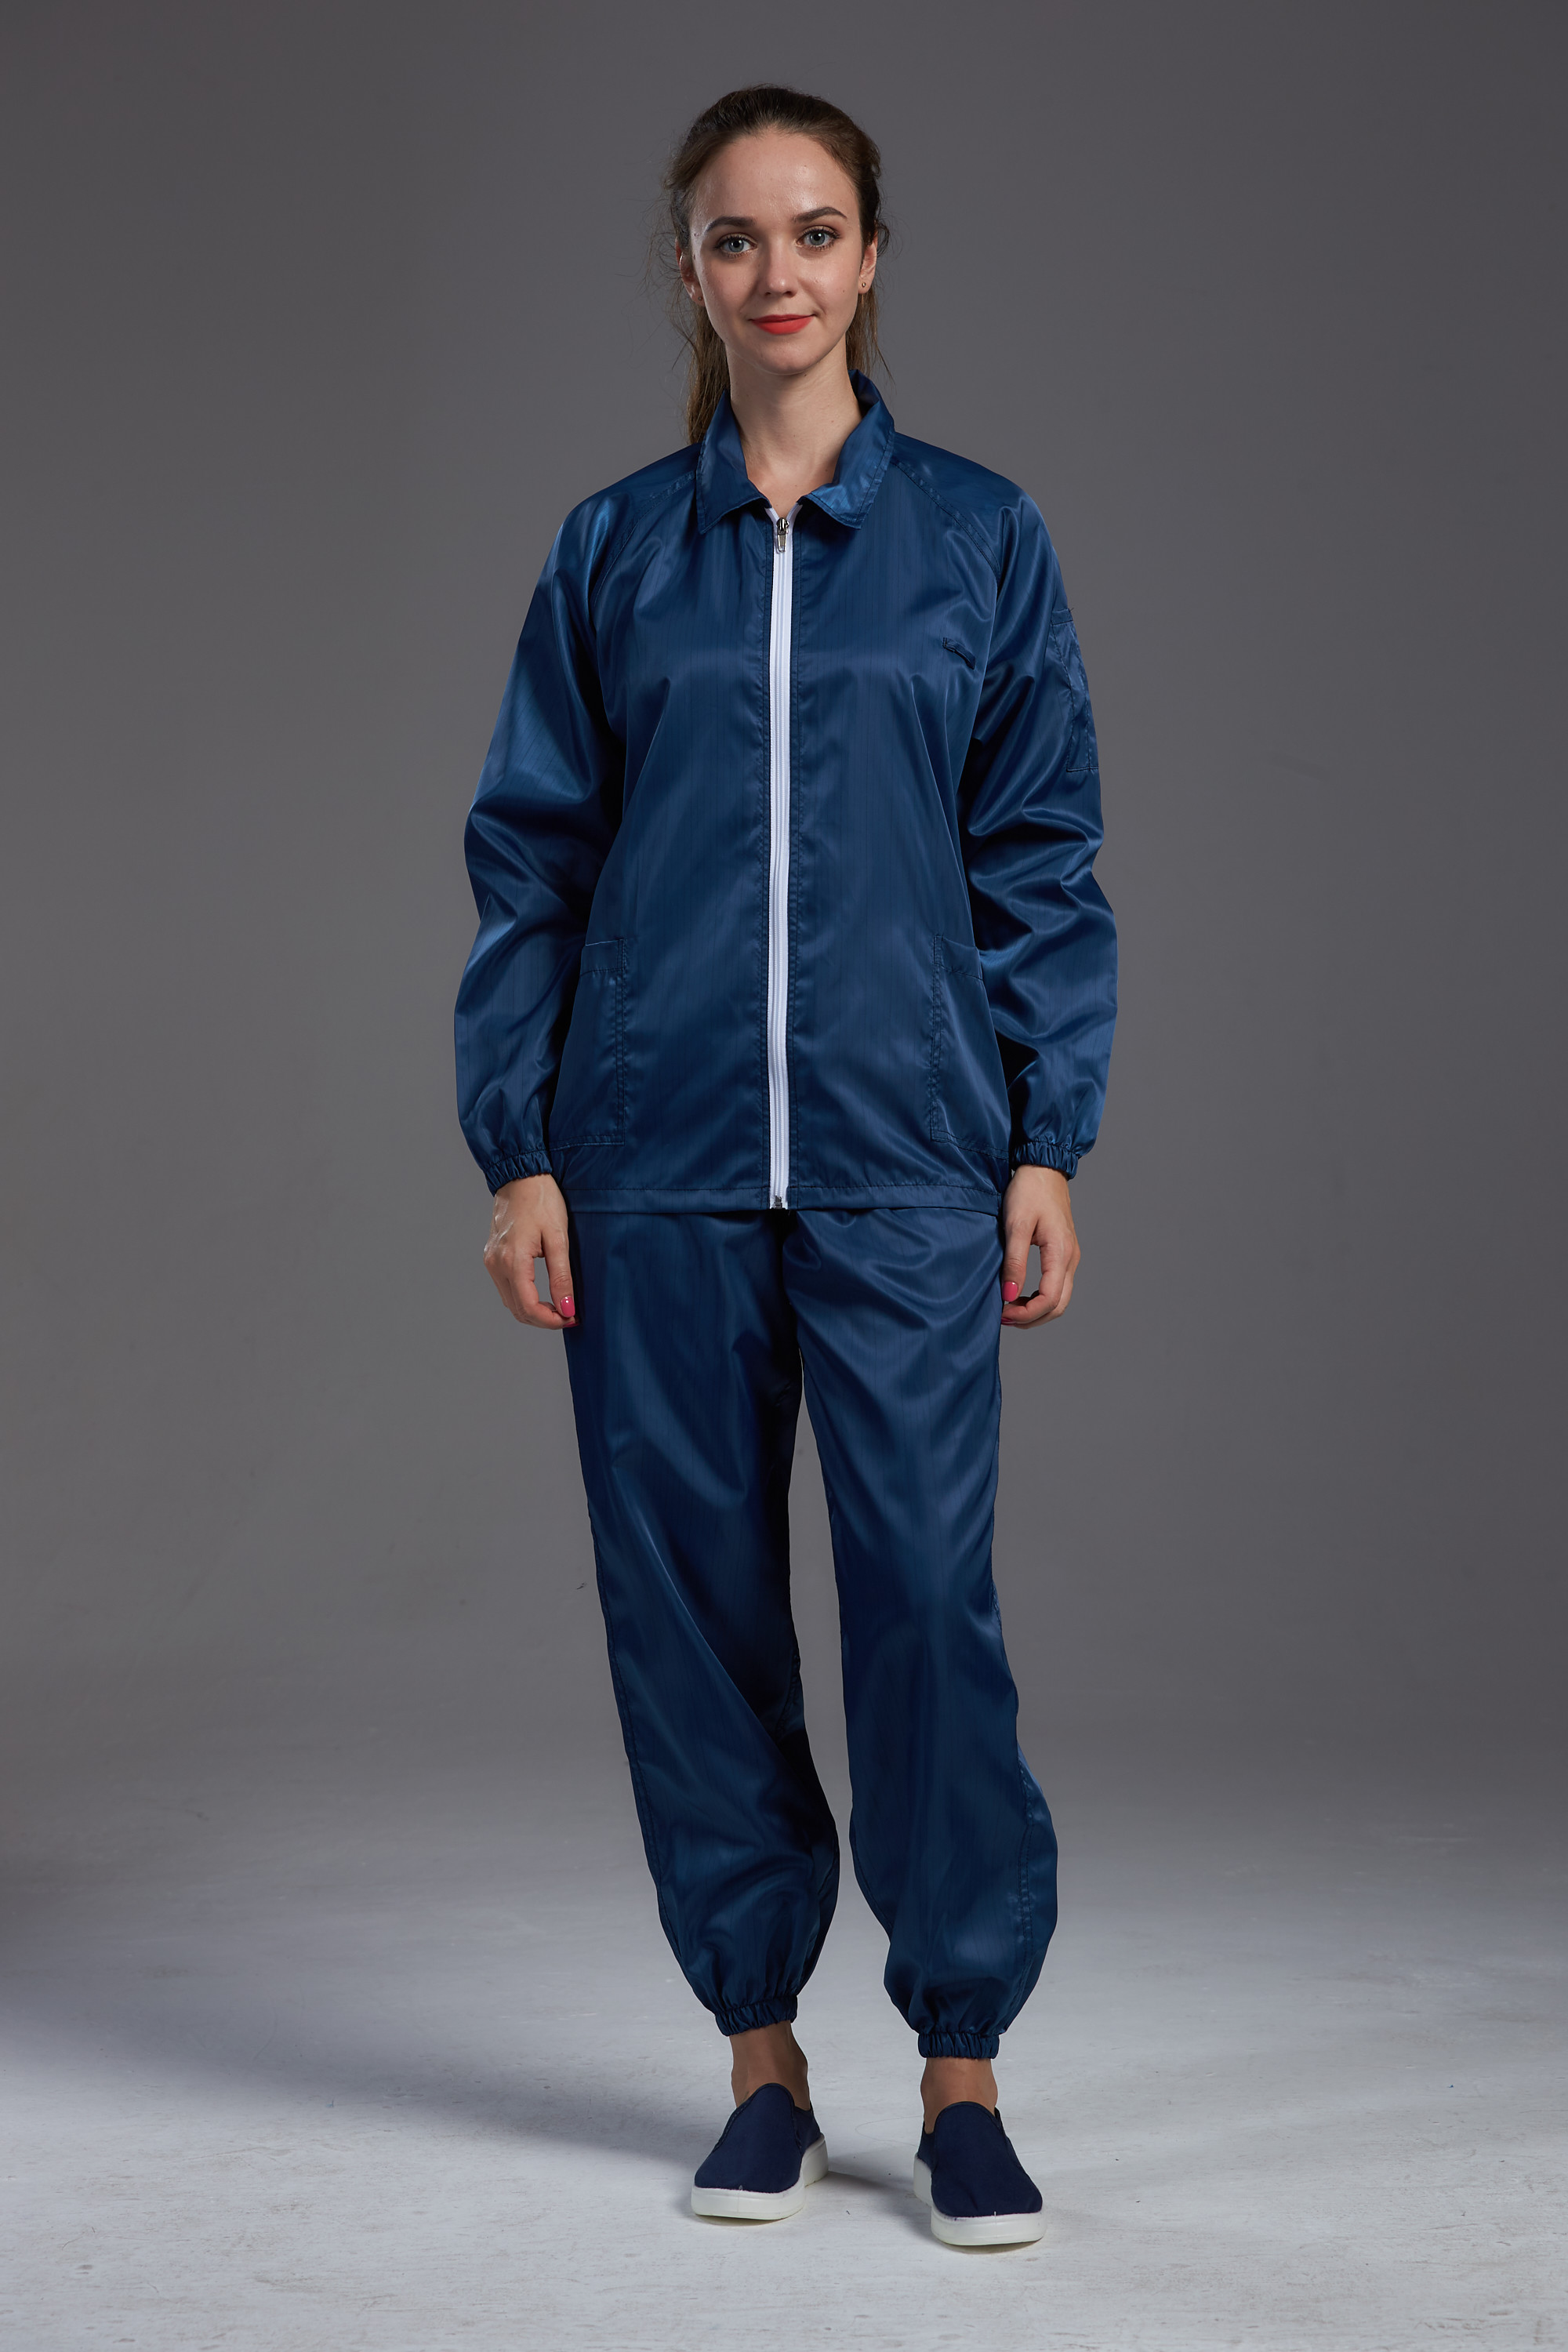 Best Electronic industry used Anti Static ESD Jacket and pants dark blue autoclaved sterilzd uniform wholesale